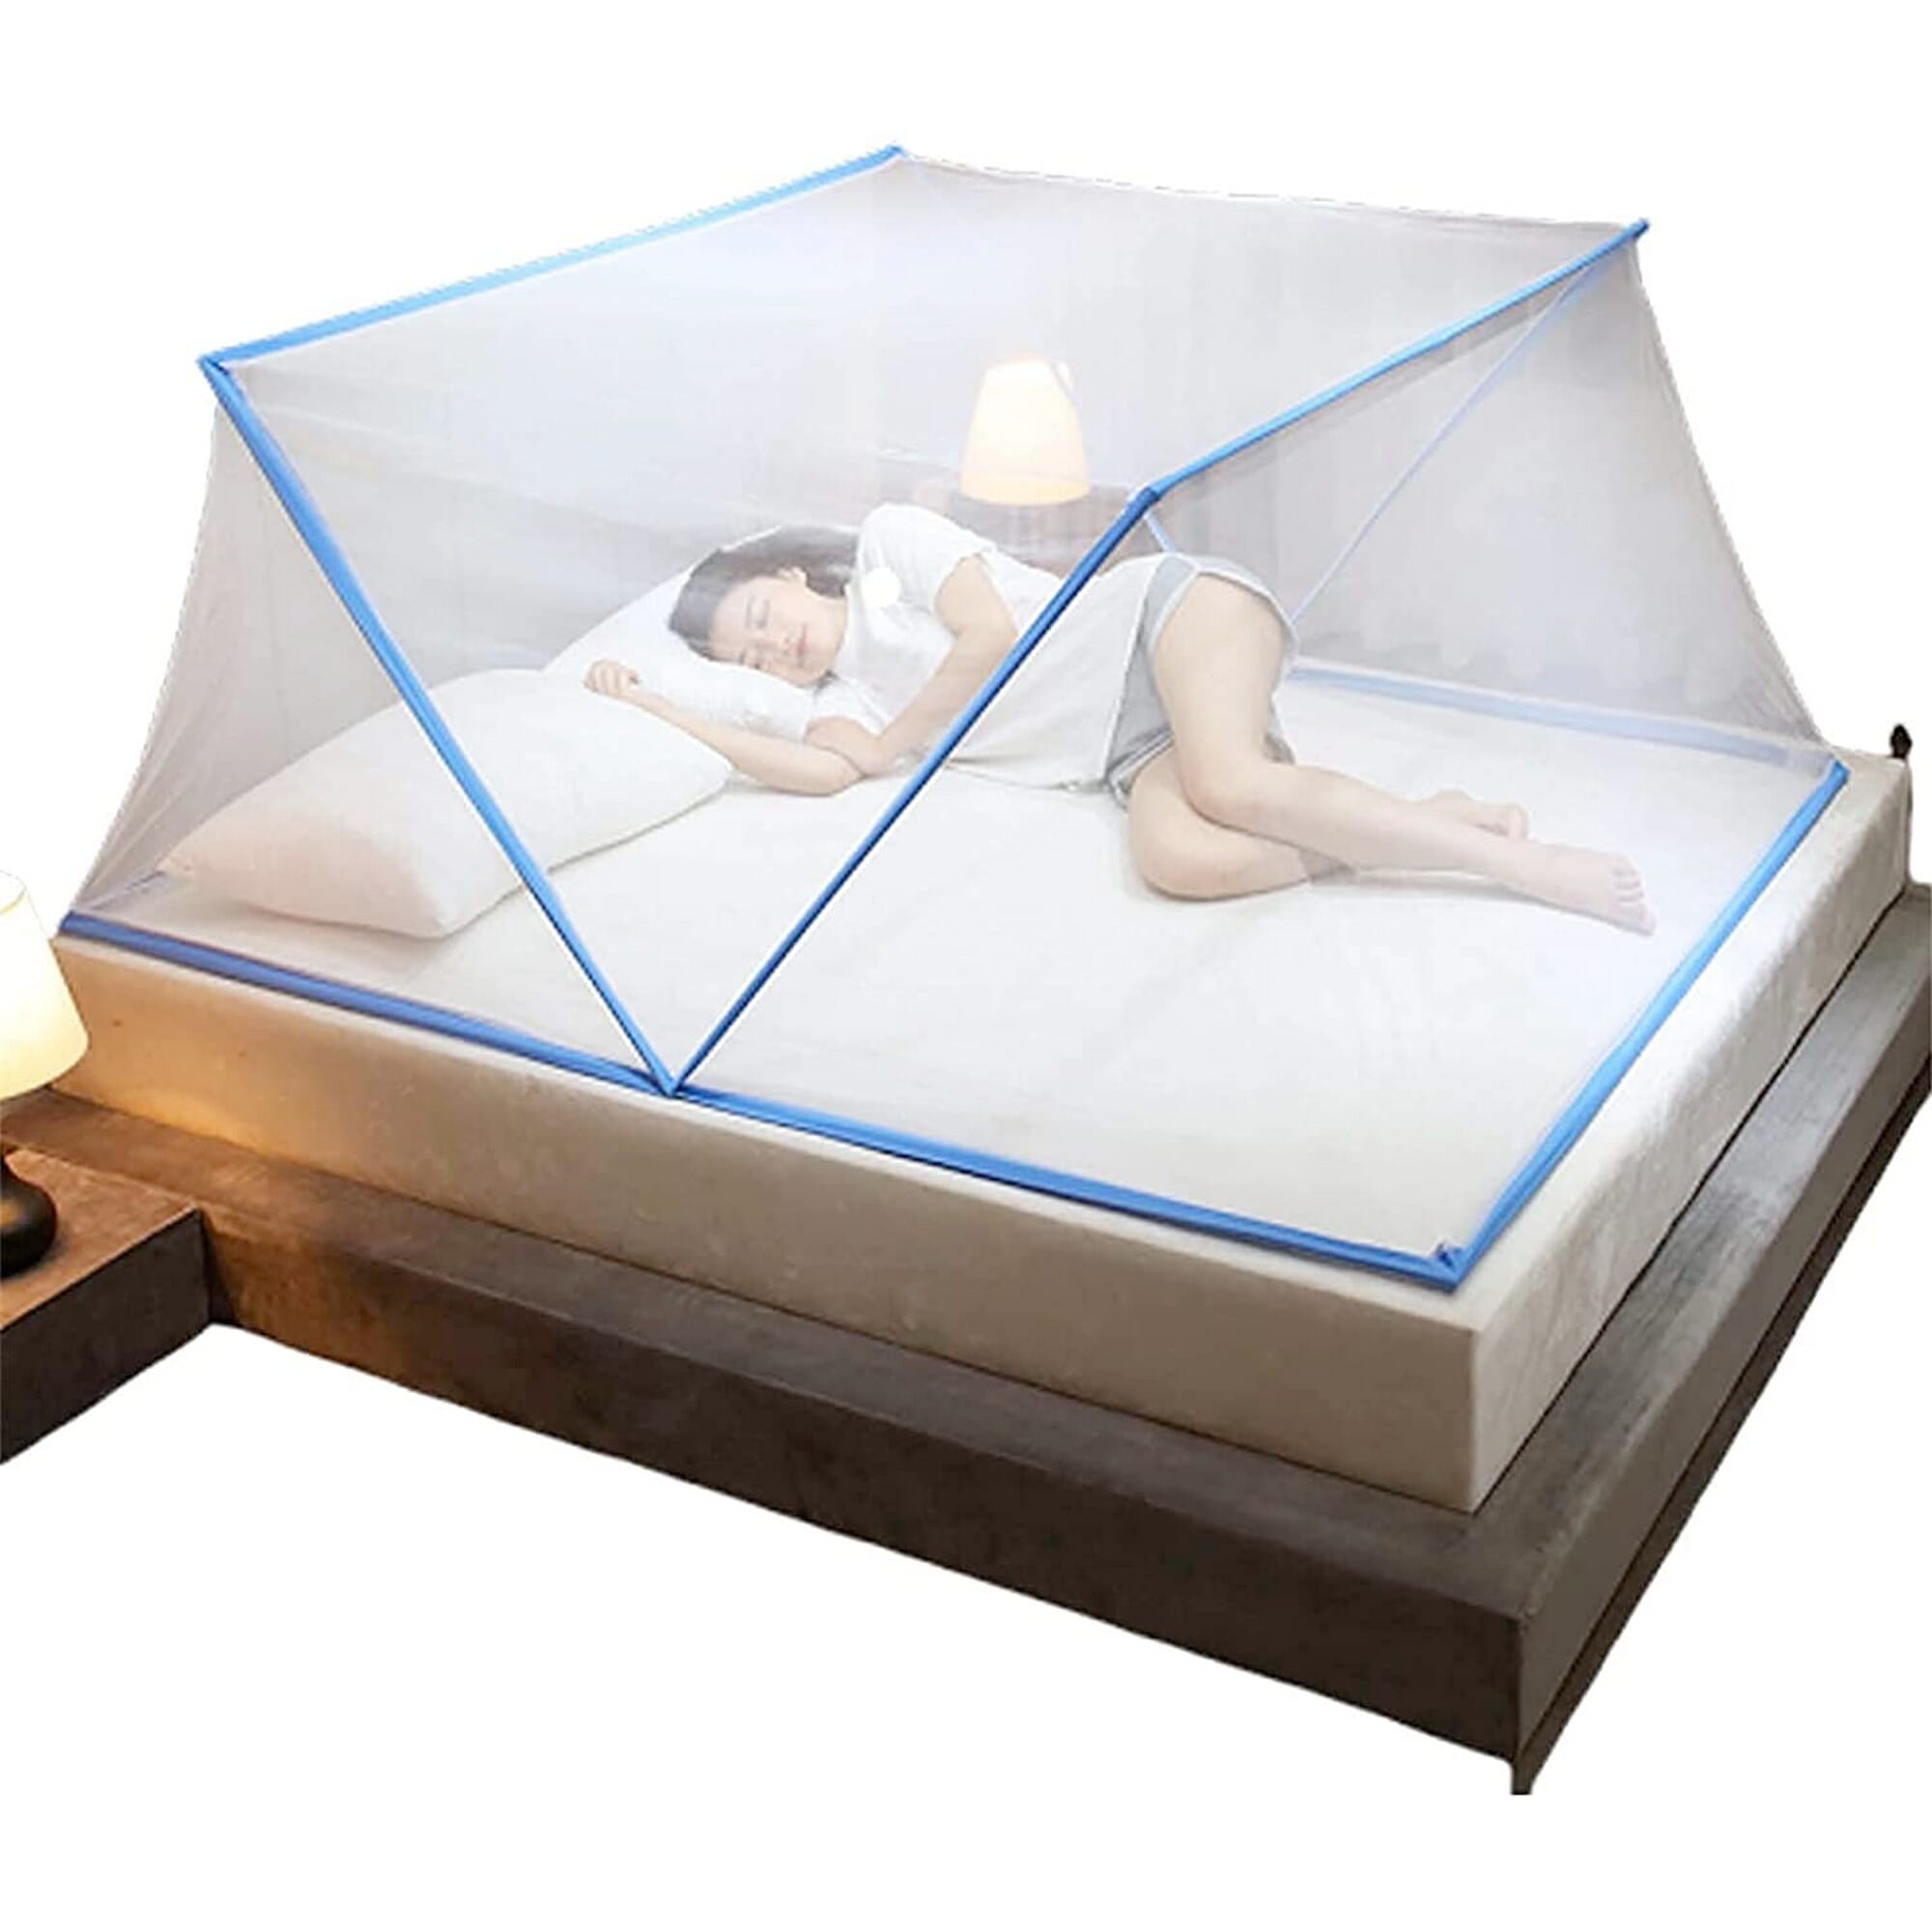 Digead Mosquito Net, Foldable Bed Mosquito Net, Portable Travel Mosquito  Net, Single Door Mosquito Camping Curtain, 100 / 120 / 150 / 180 cm x 200  cm